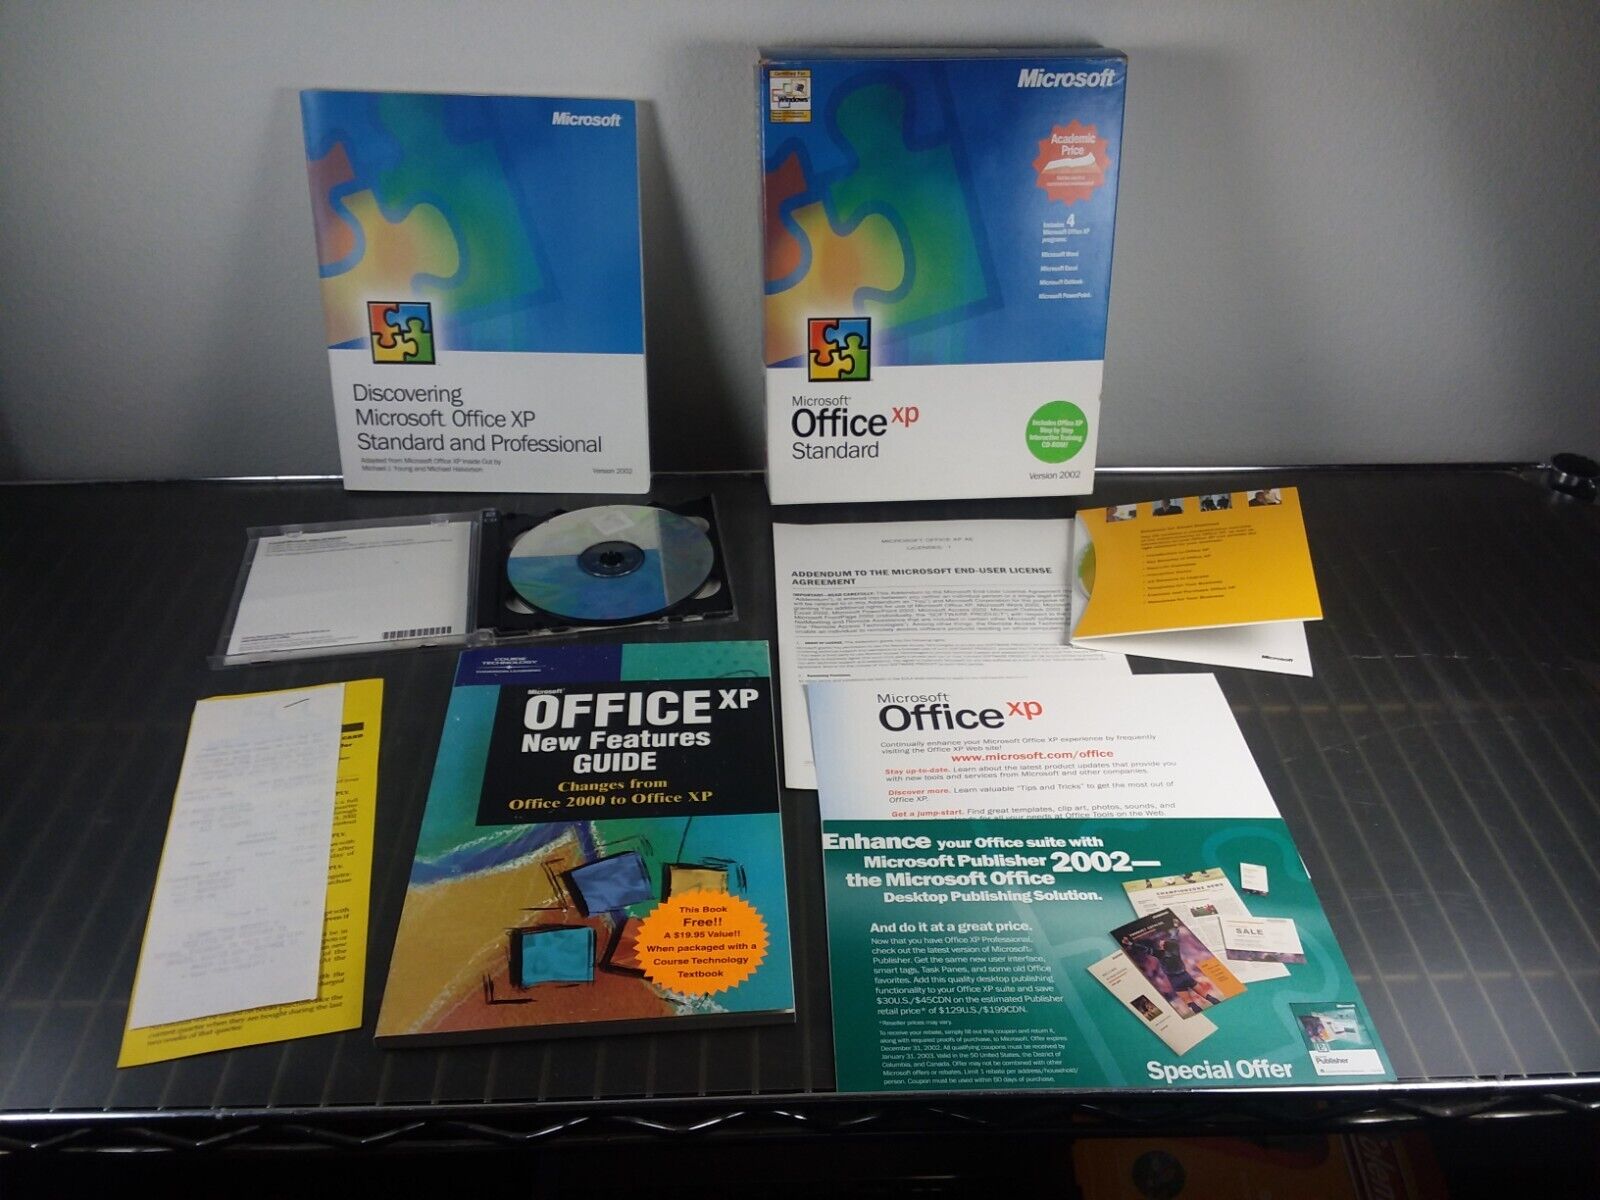 Microsoft Office XP Standard Academic Version 2002 PC Computer Software Complete